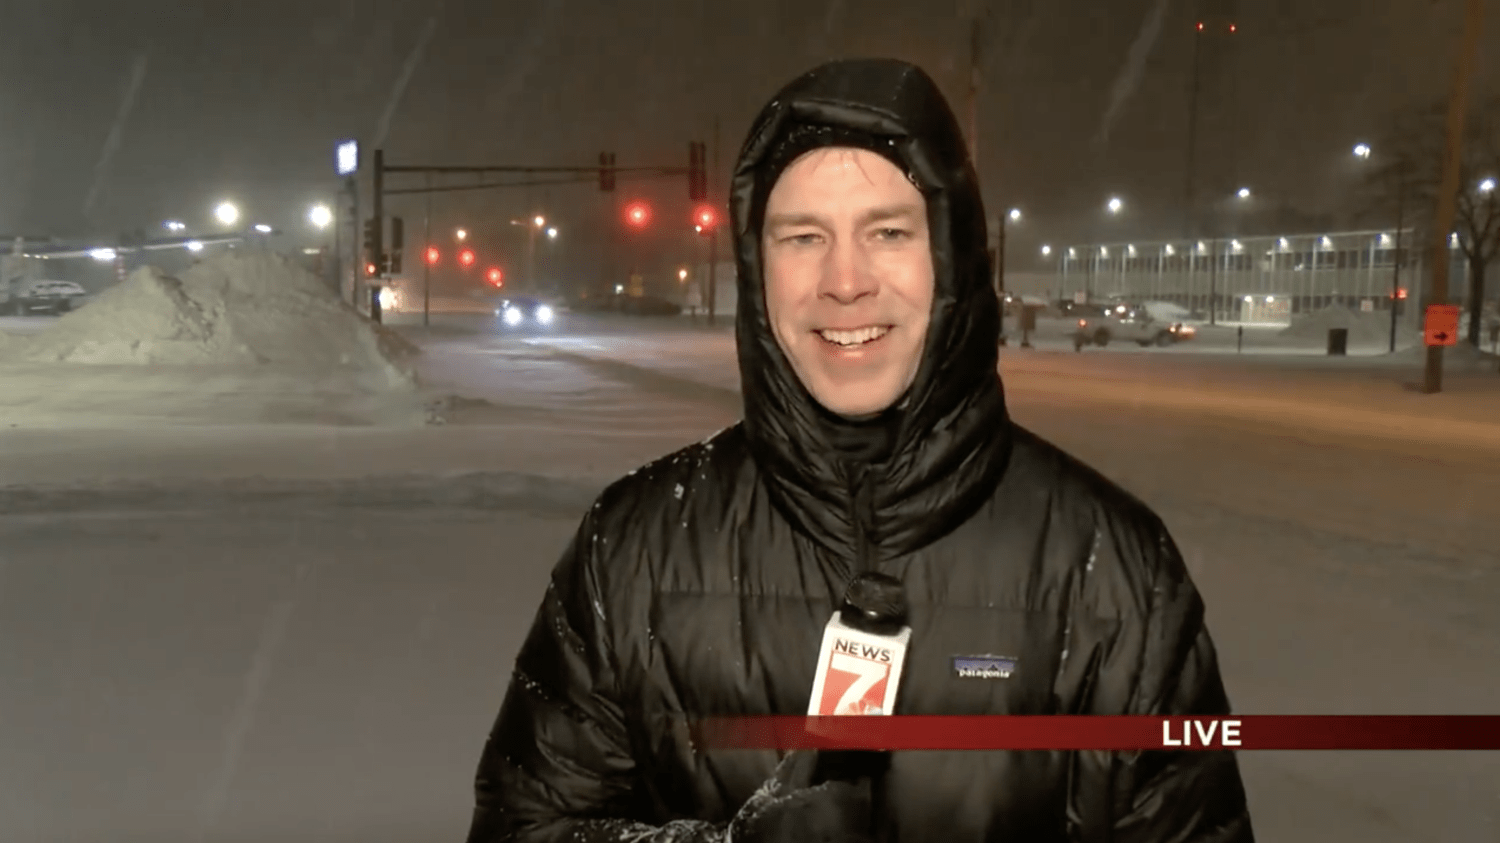 Iowa Sports Reporter Mark Woodley's Weather Coverage Goes Viral